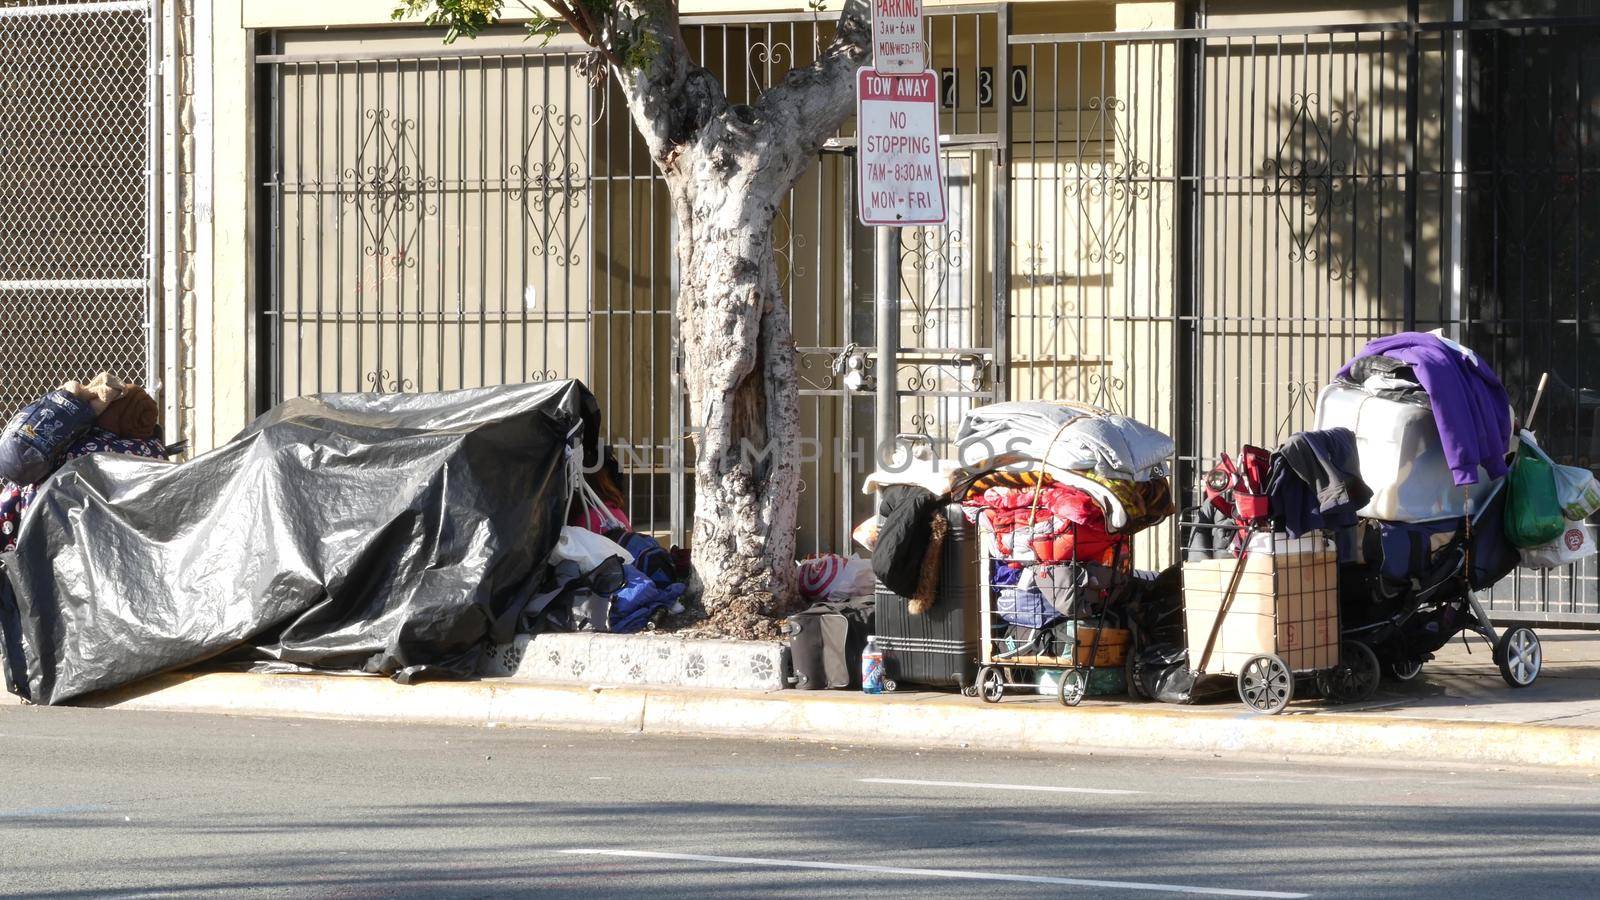 SAN DIEGO, CALIFORNIA USA - 4 JAN 2020: Stuff of homeless street people on walkway, truck on roadside. Begging problem in downtown of city near Los Angeles. Jobless beggars live on pavements.